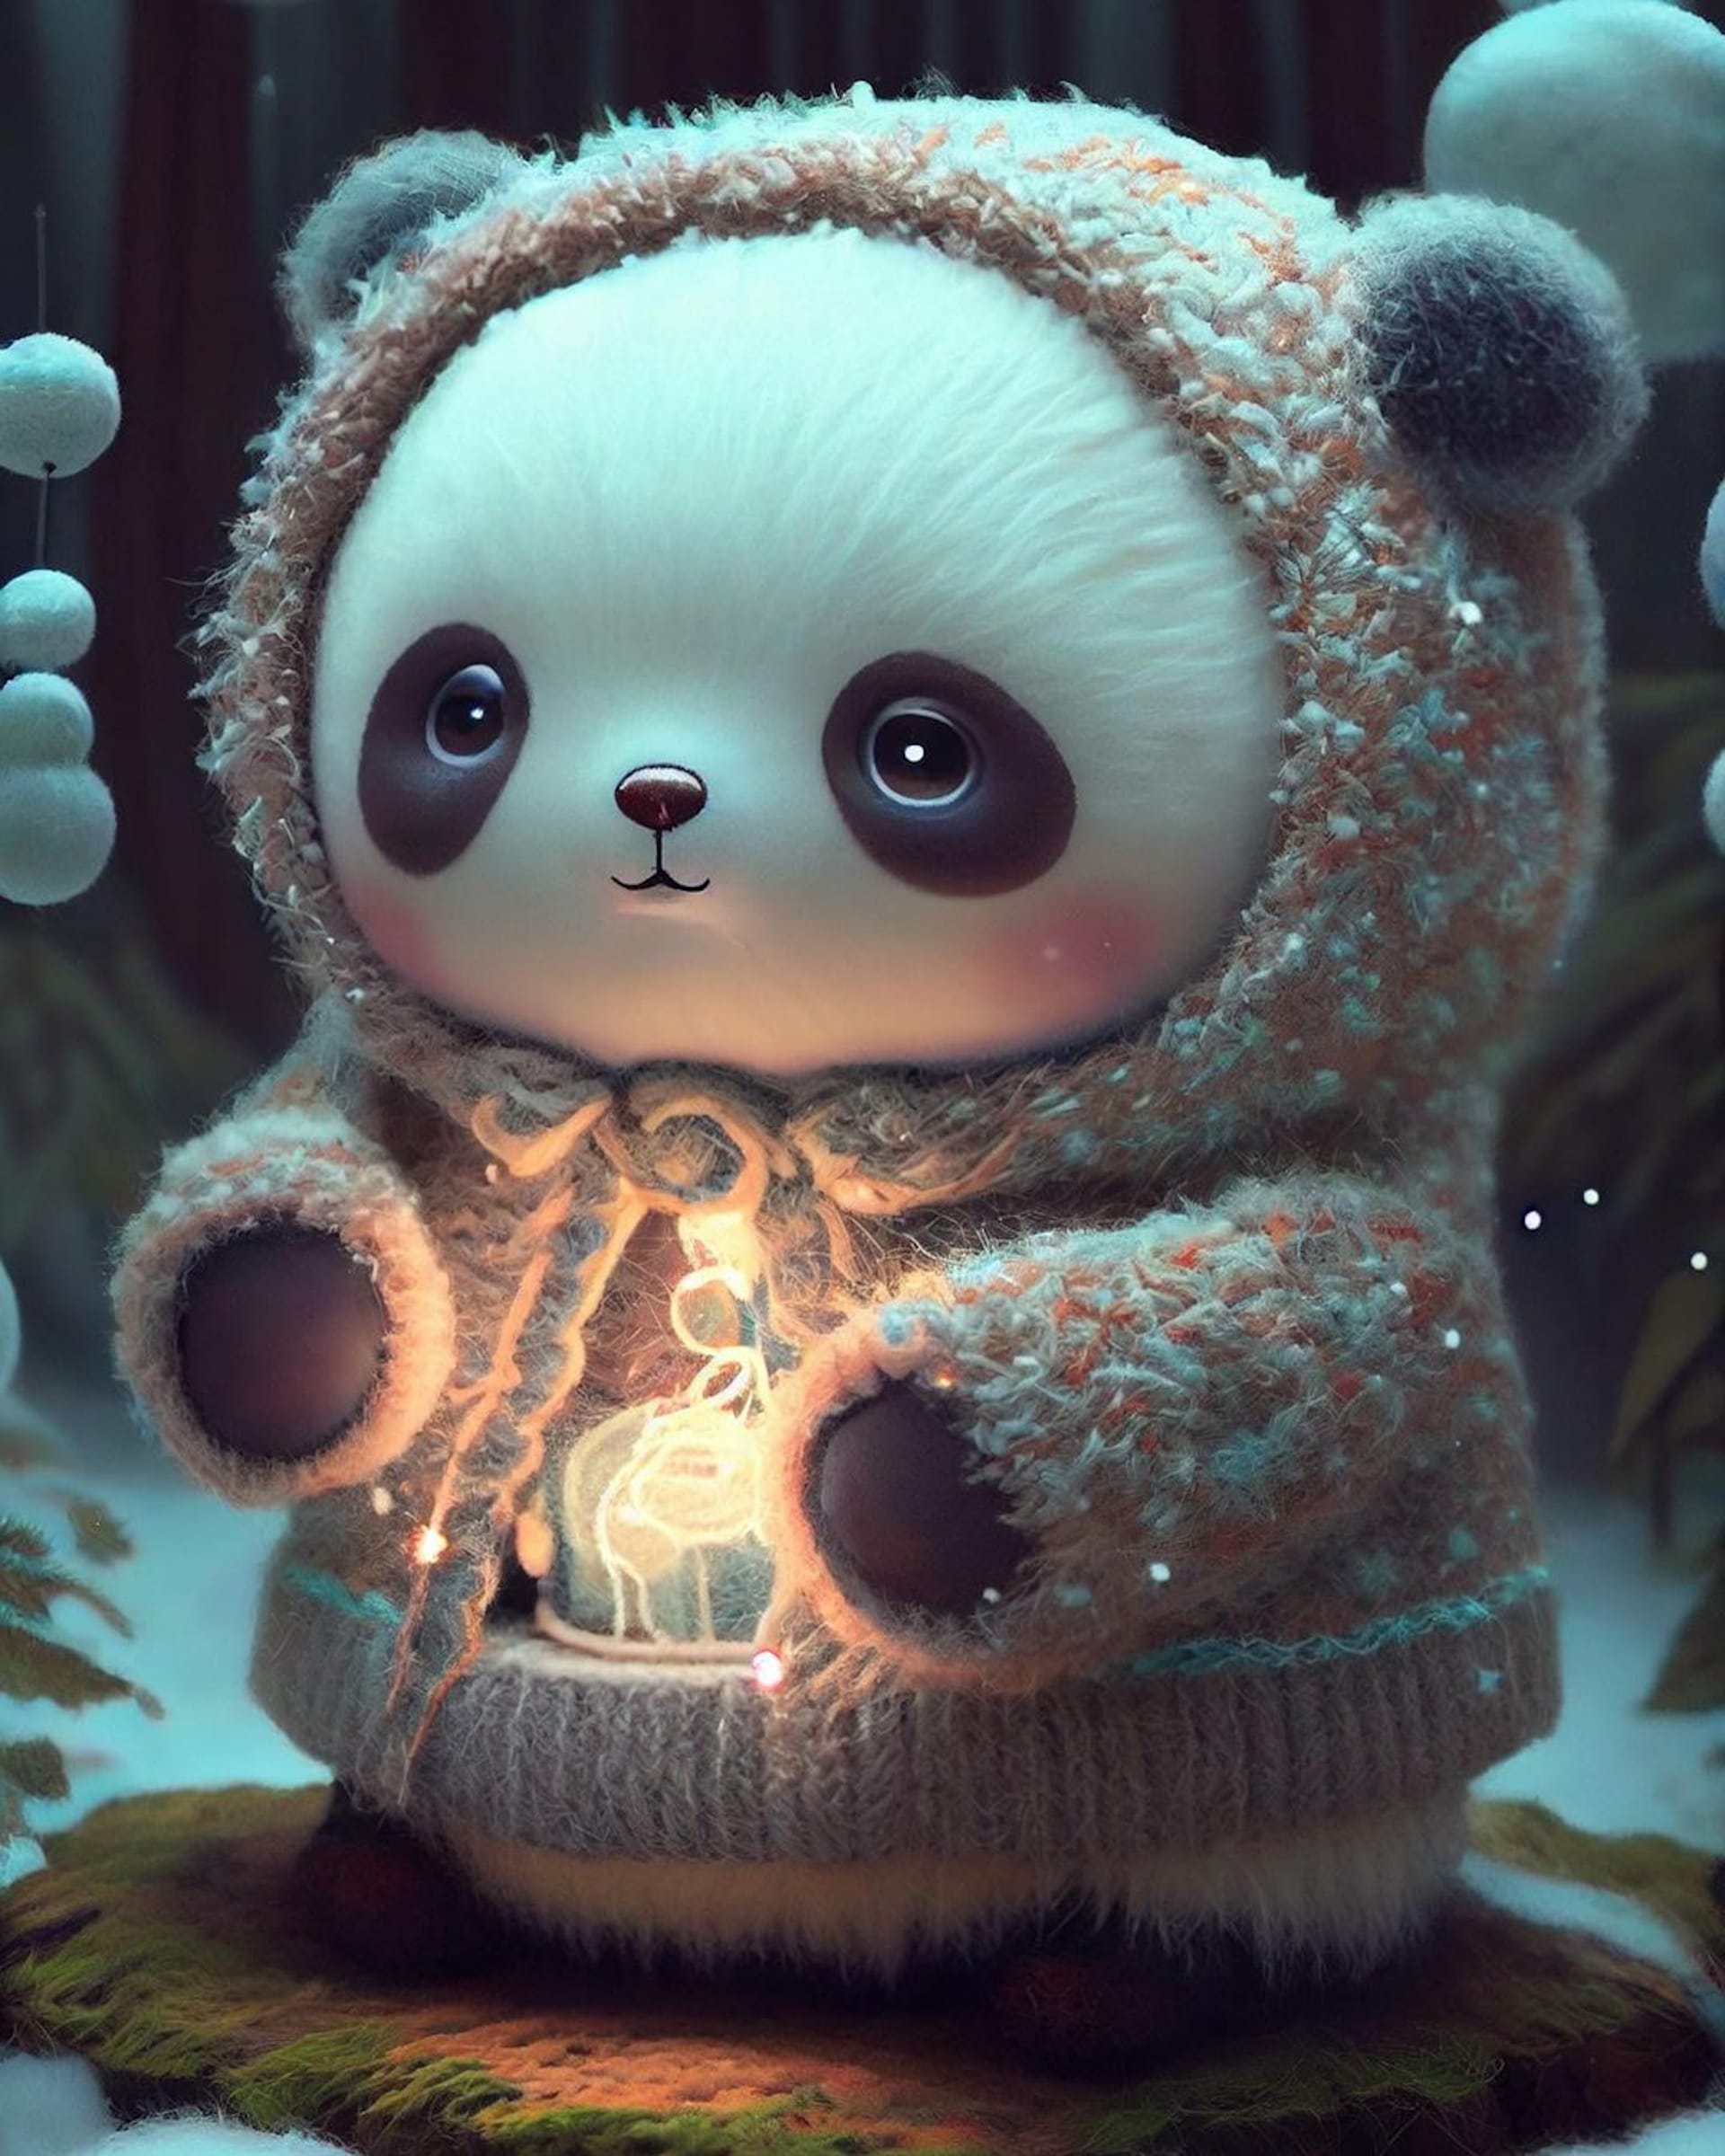 Panda with sweater that says i love you